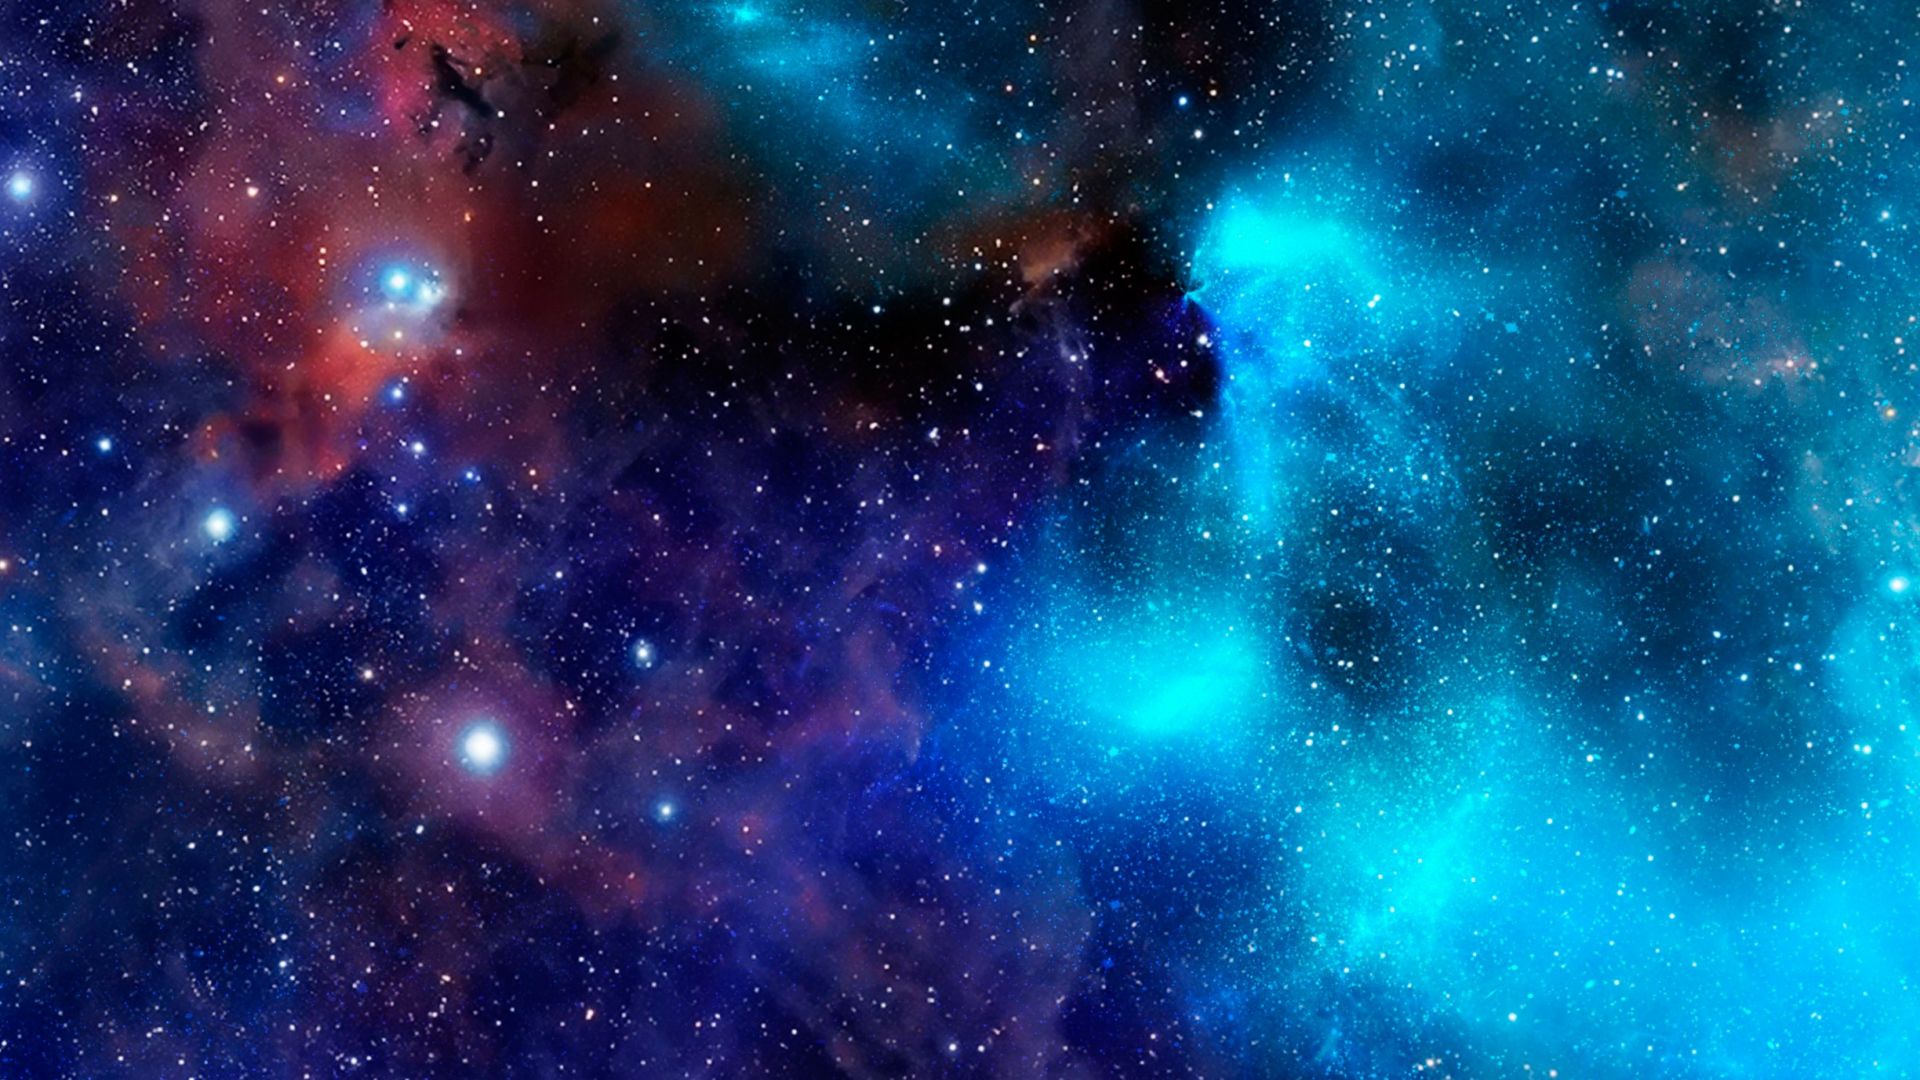 Desktop Wallpaper Galaxy, Stars, Space, Colorful, Hd Image, Picture ...